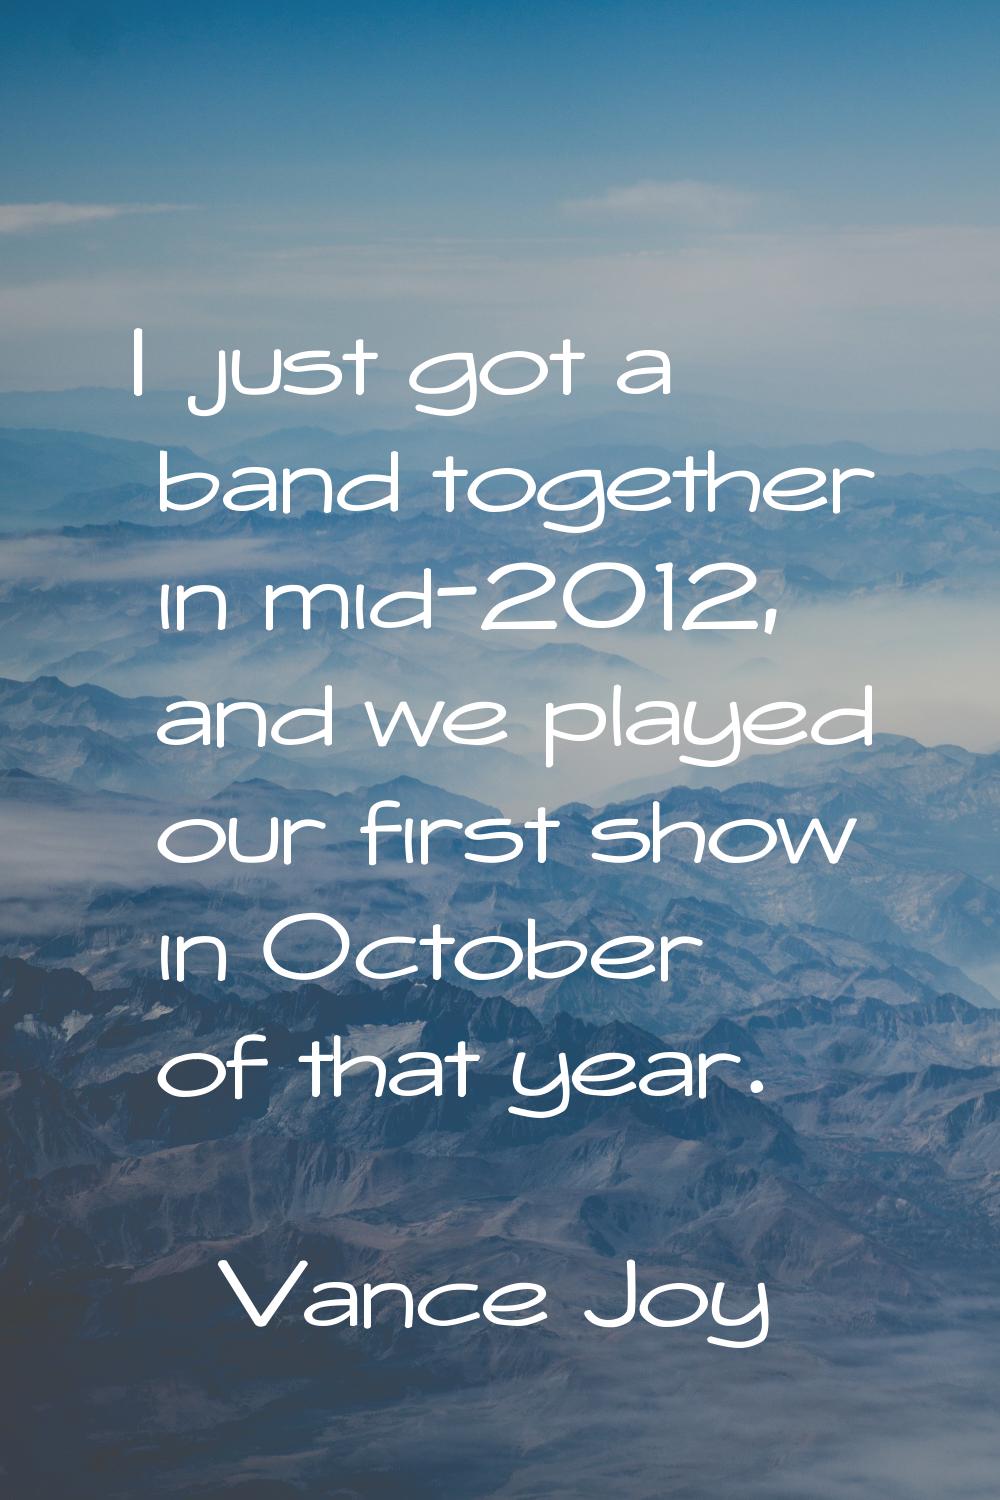 I just got a band together in mid-2012, and we played our first show in October of that year.